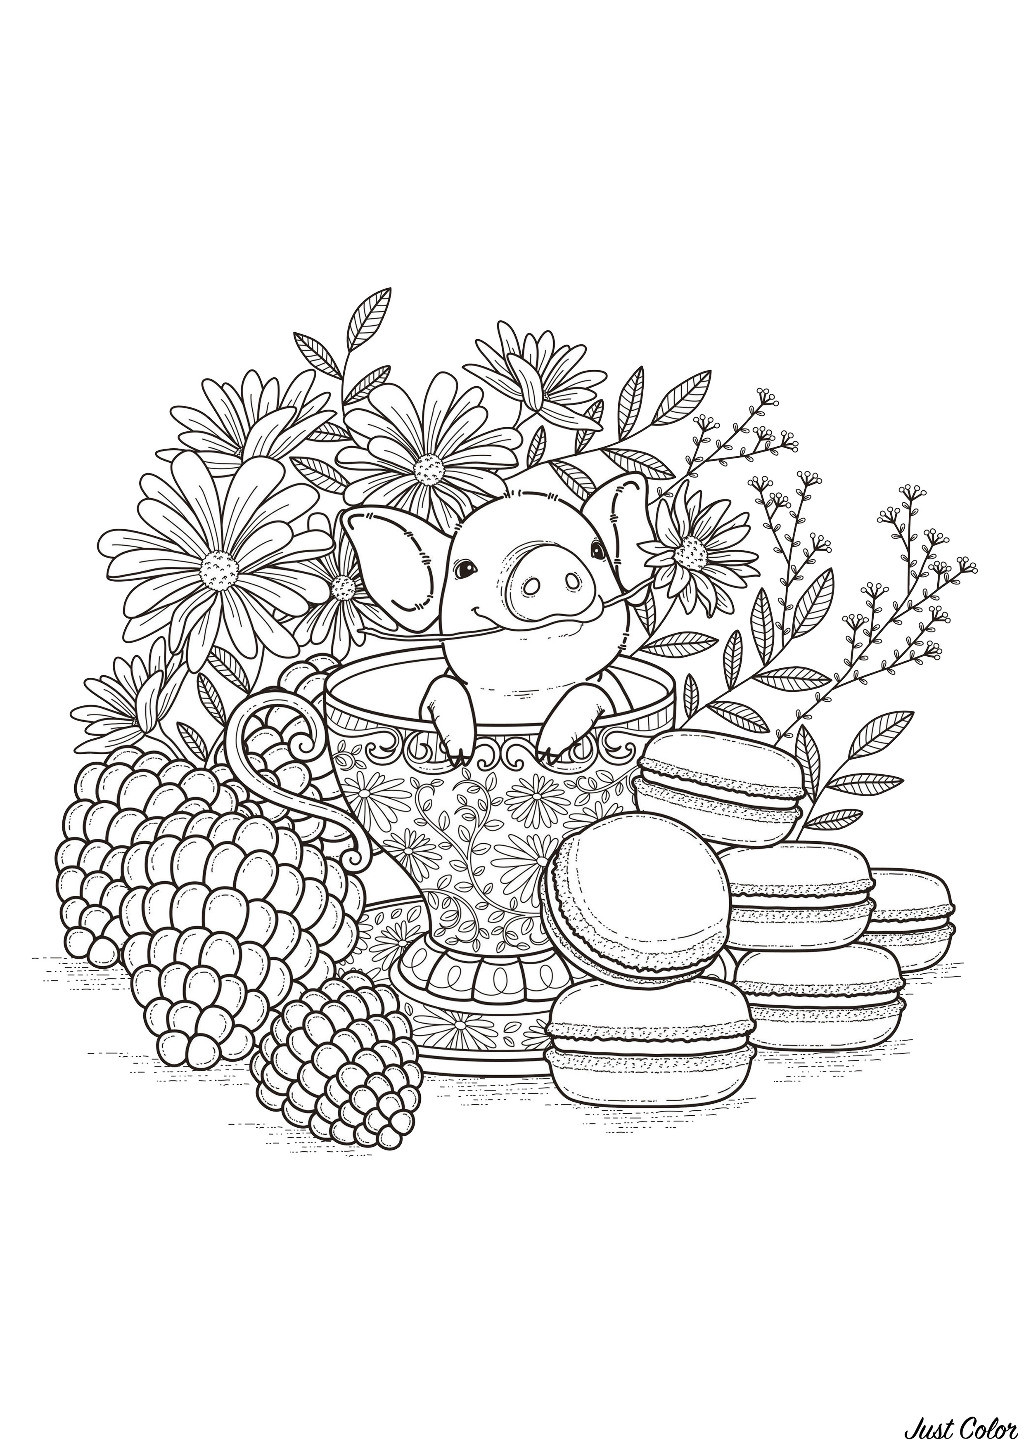 Pig Coloring Pages For Adults
 Baby pork Pigs Adult Coloring Pages